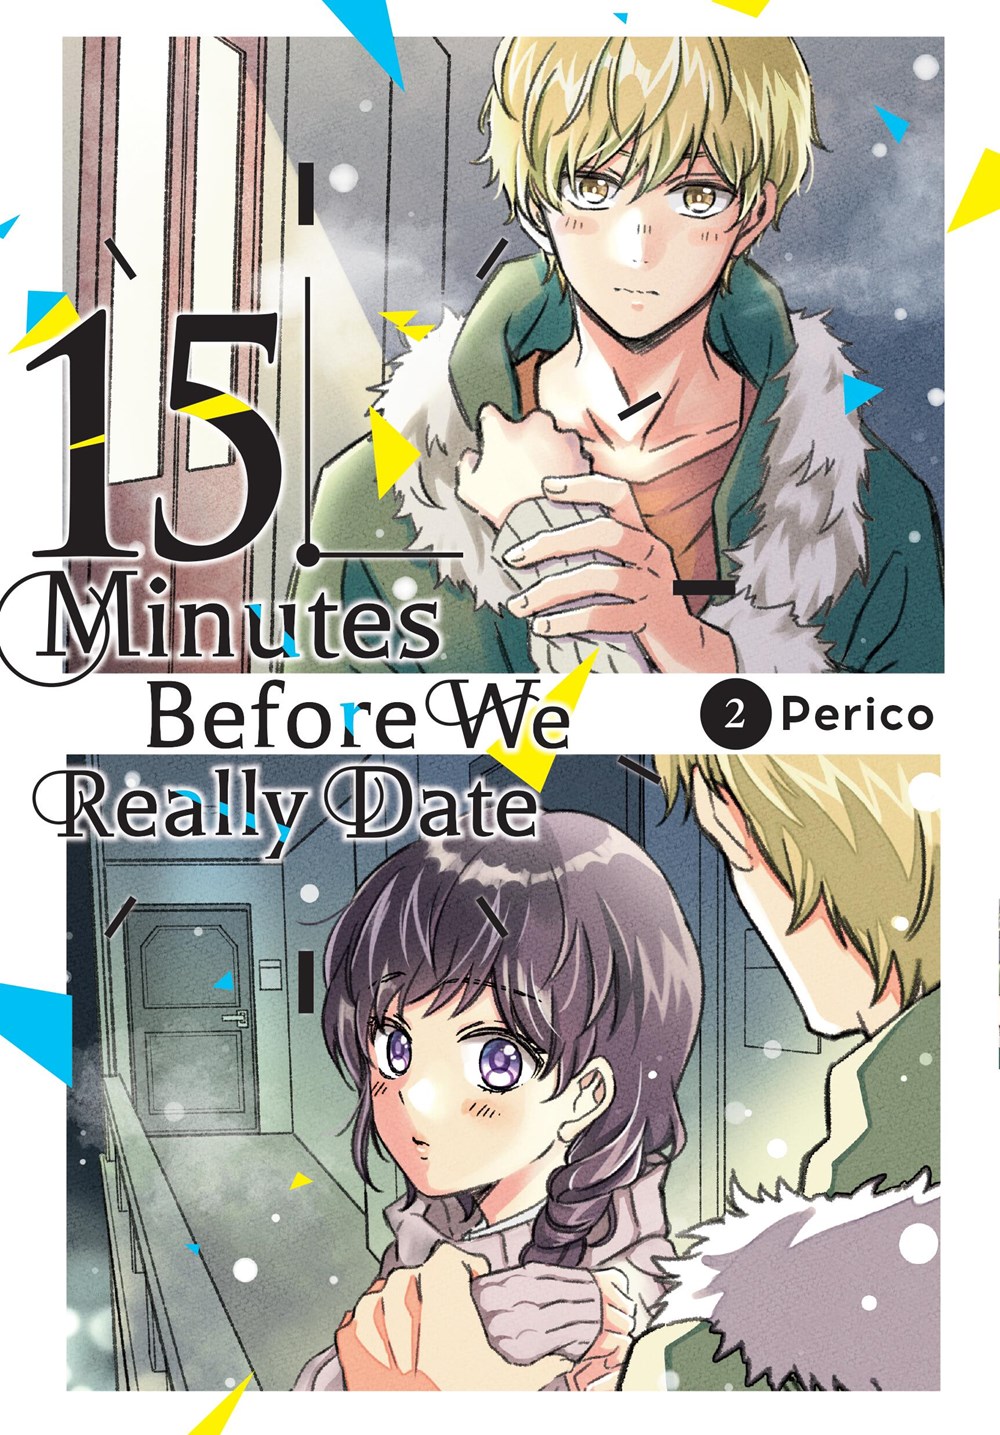 fifteen-minutes-before-we-really-date-manga-volume-2 image count 0